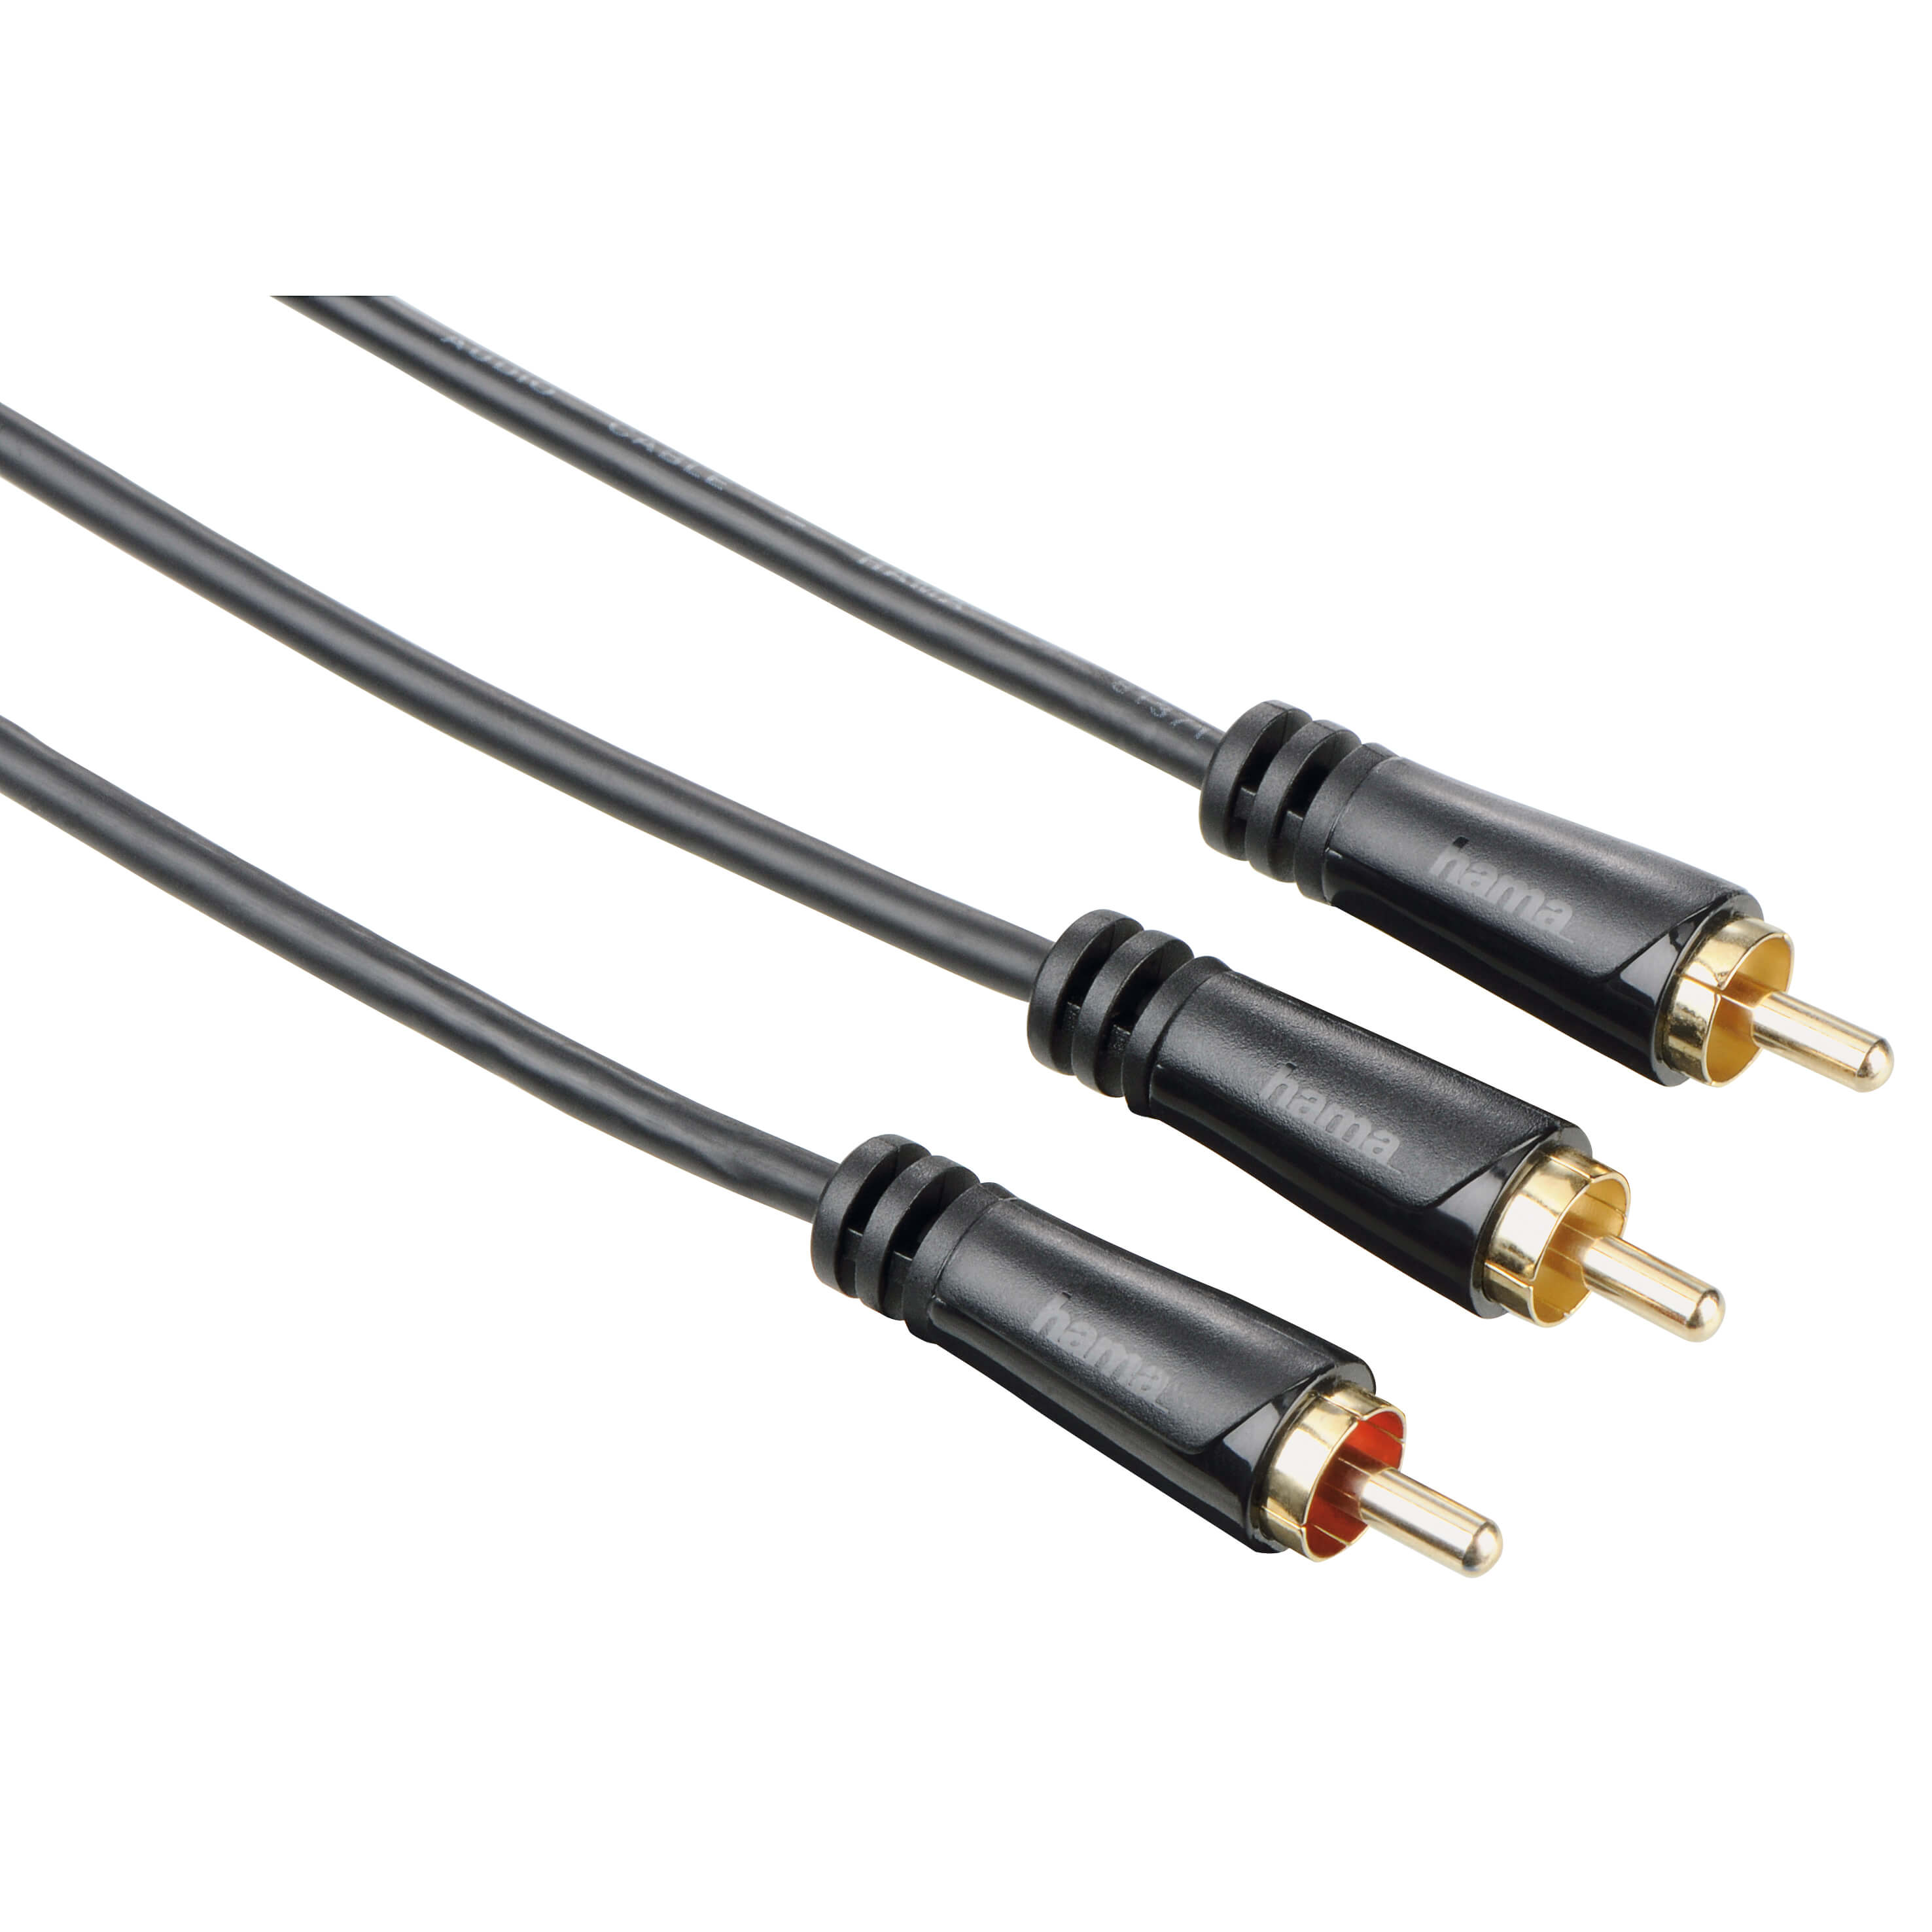 Subwoofer Cable, RCA plug - 2 RCA plugs, gold-plated, 1.5 m